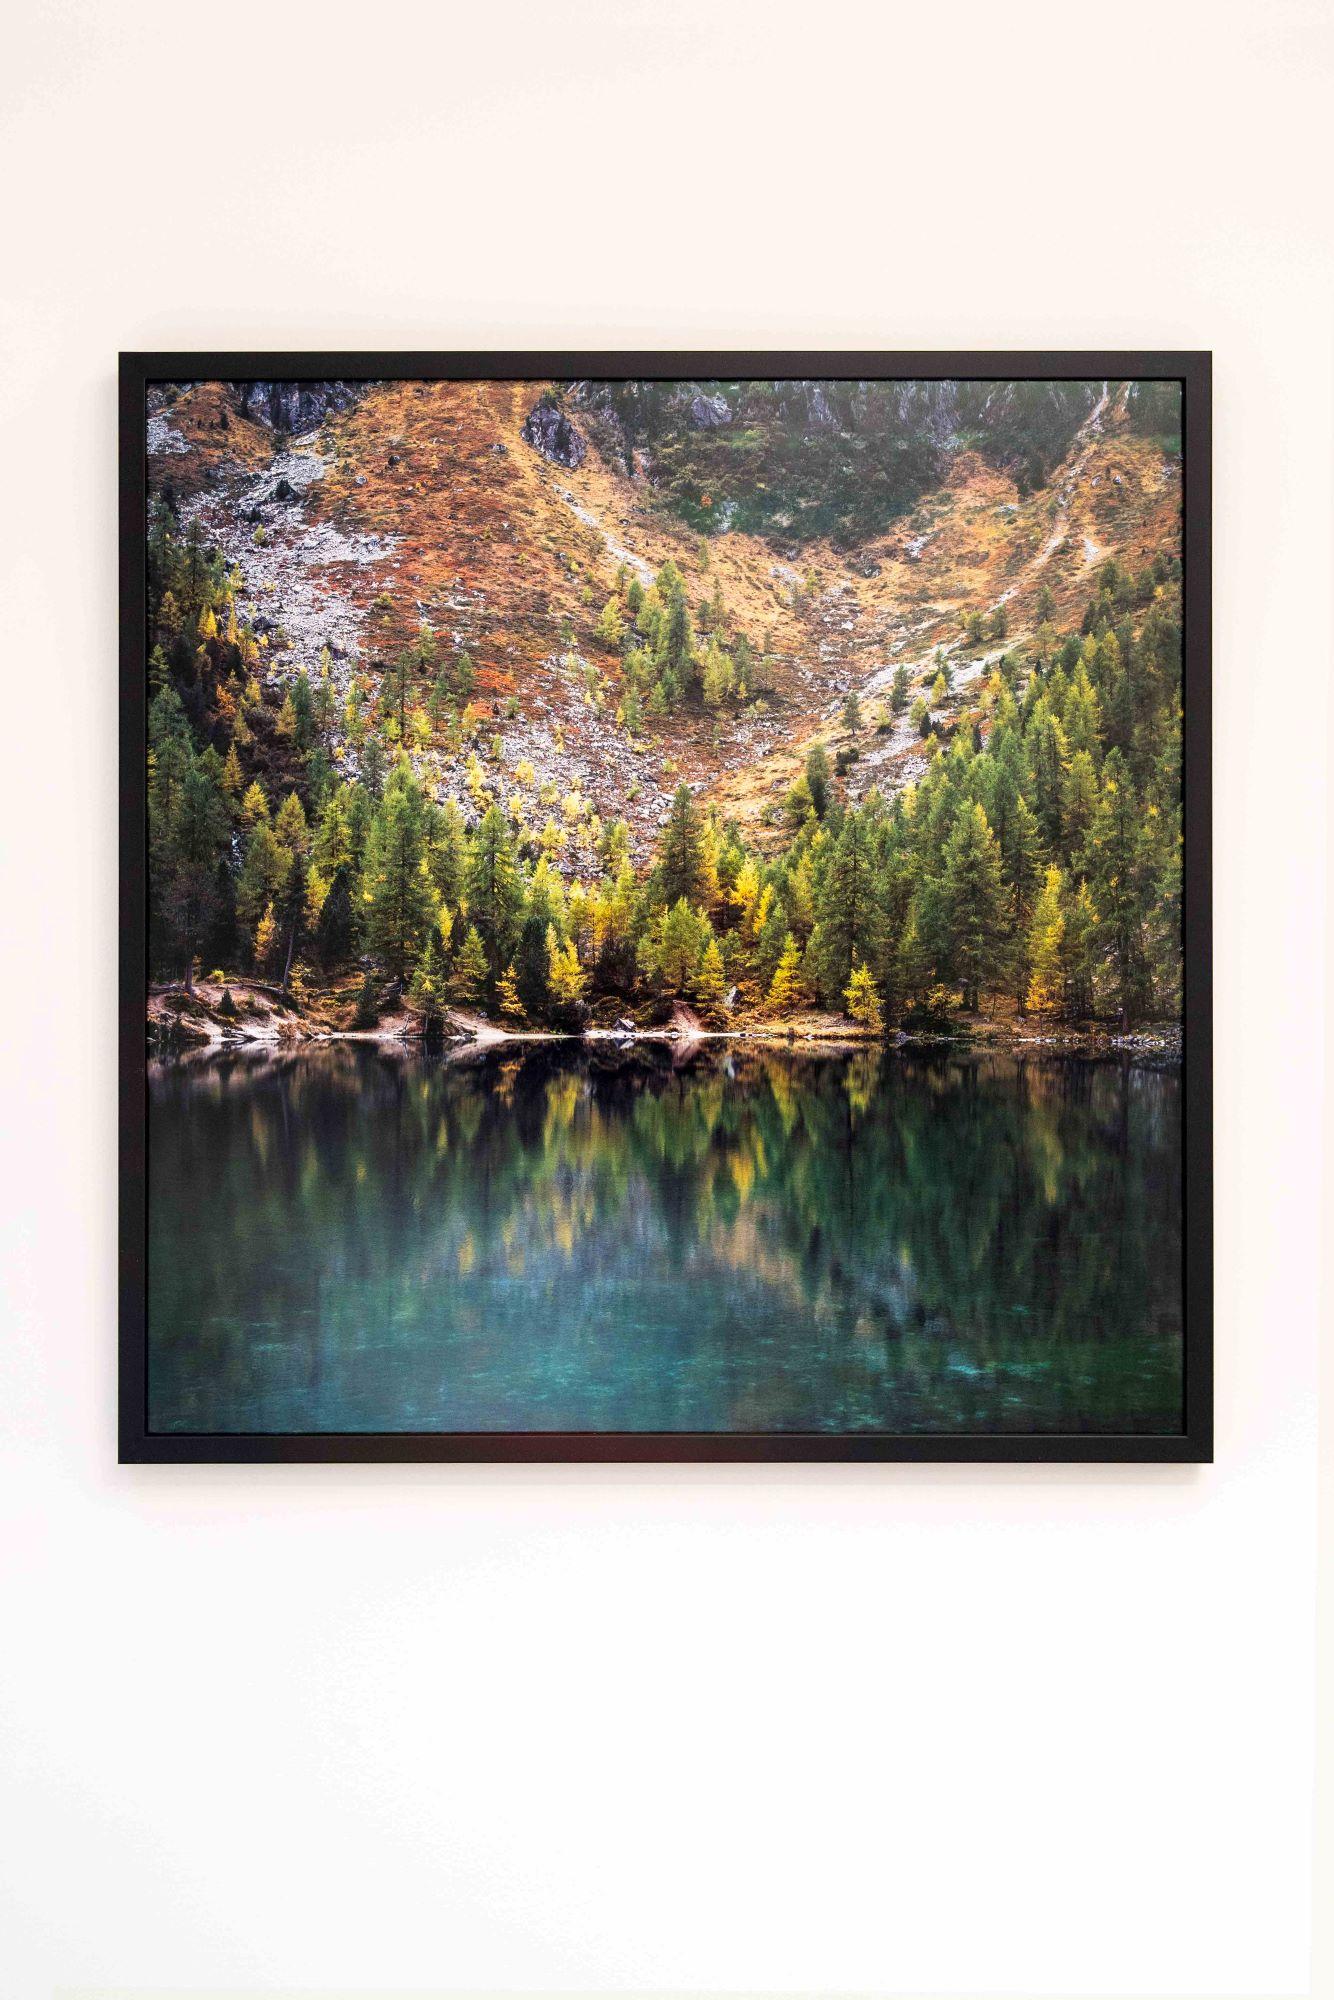 Winter Pine by Luca Marziale - Landscape photography, mountain landscape, lake For Sale 3